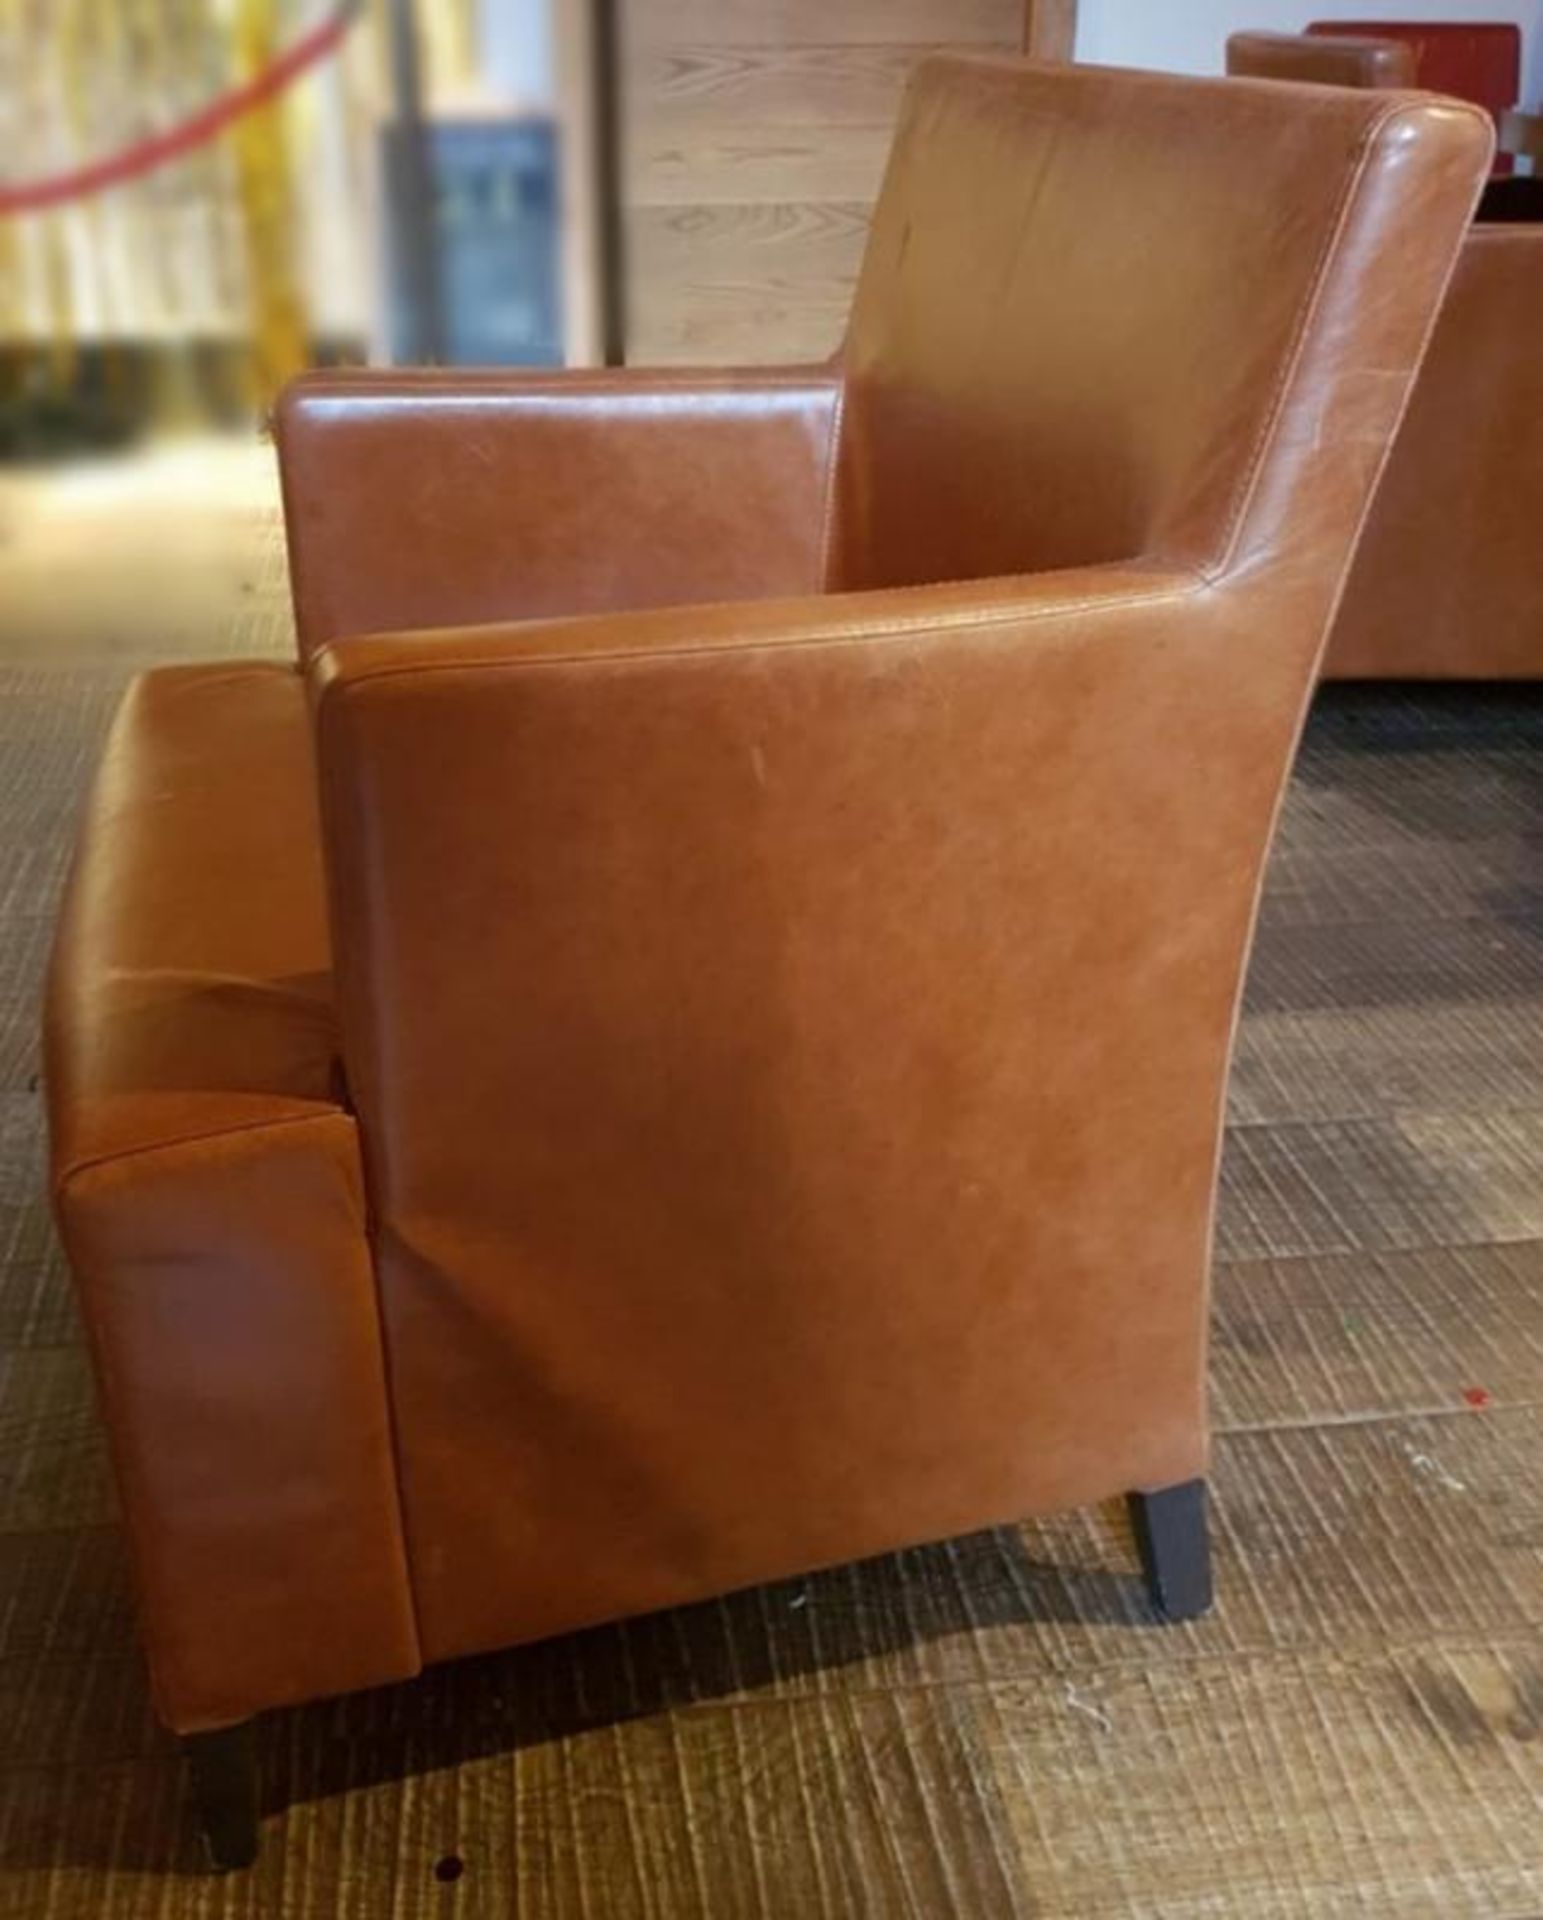 1 x Large Armchair Upholstered In Tan Leather - Recently Removed From A City Centre Steakhouse Resta - Image 3 of 5